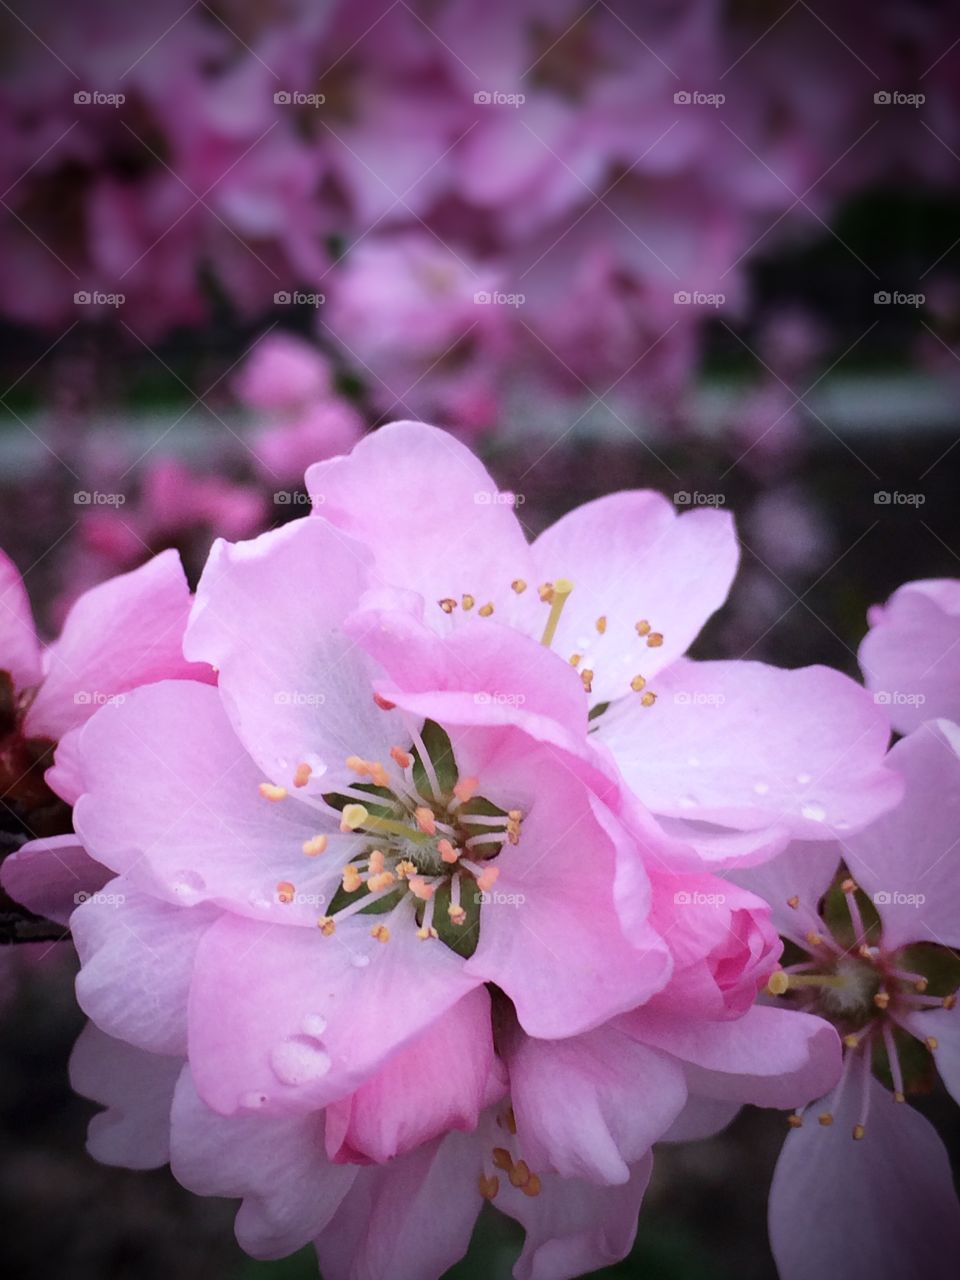 Pink flowers with water droplets 